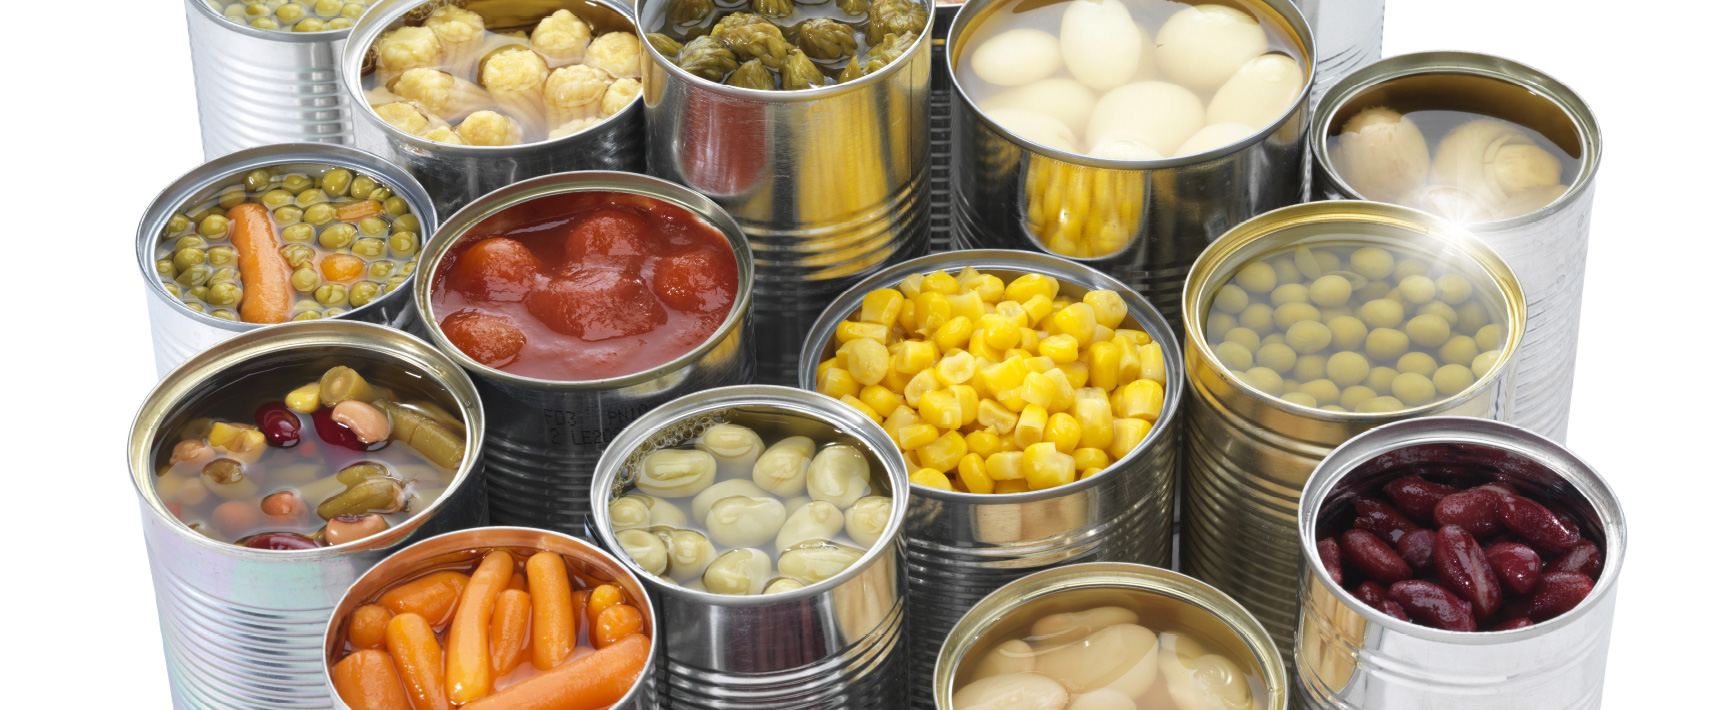 Canned Food UK - Promoting canned foods in the UK